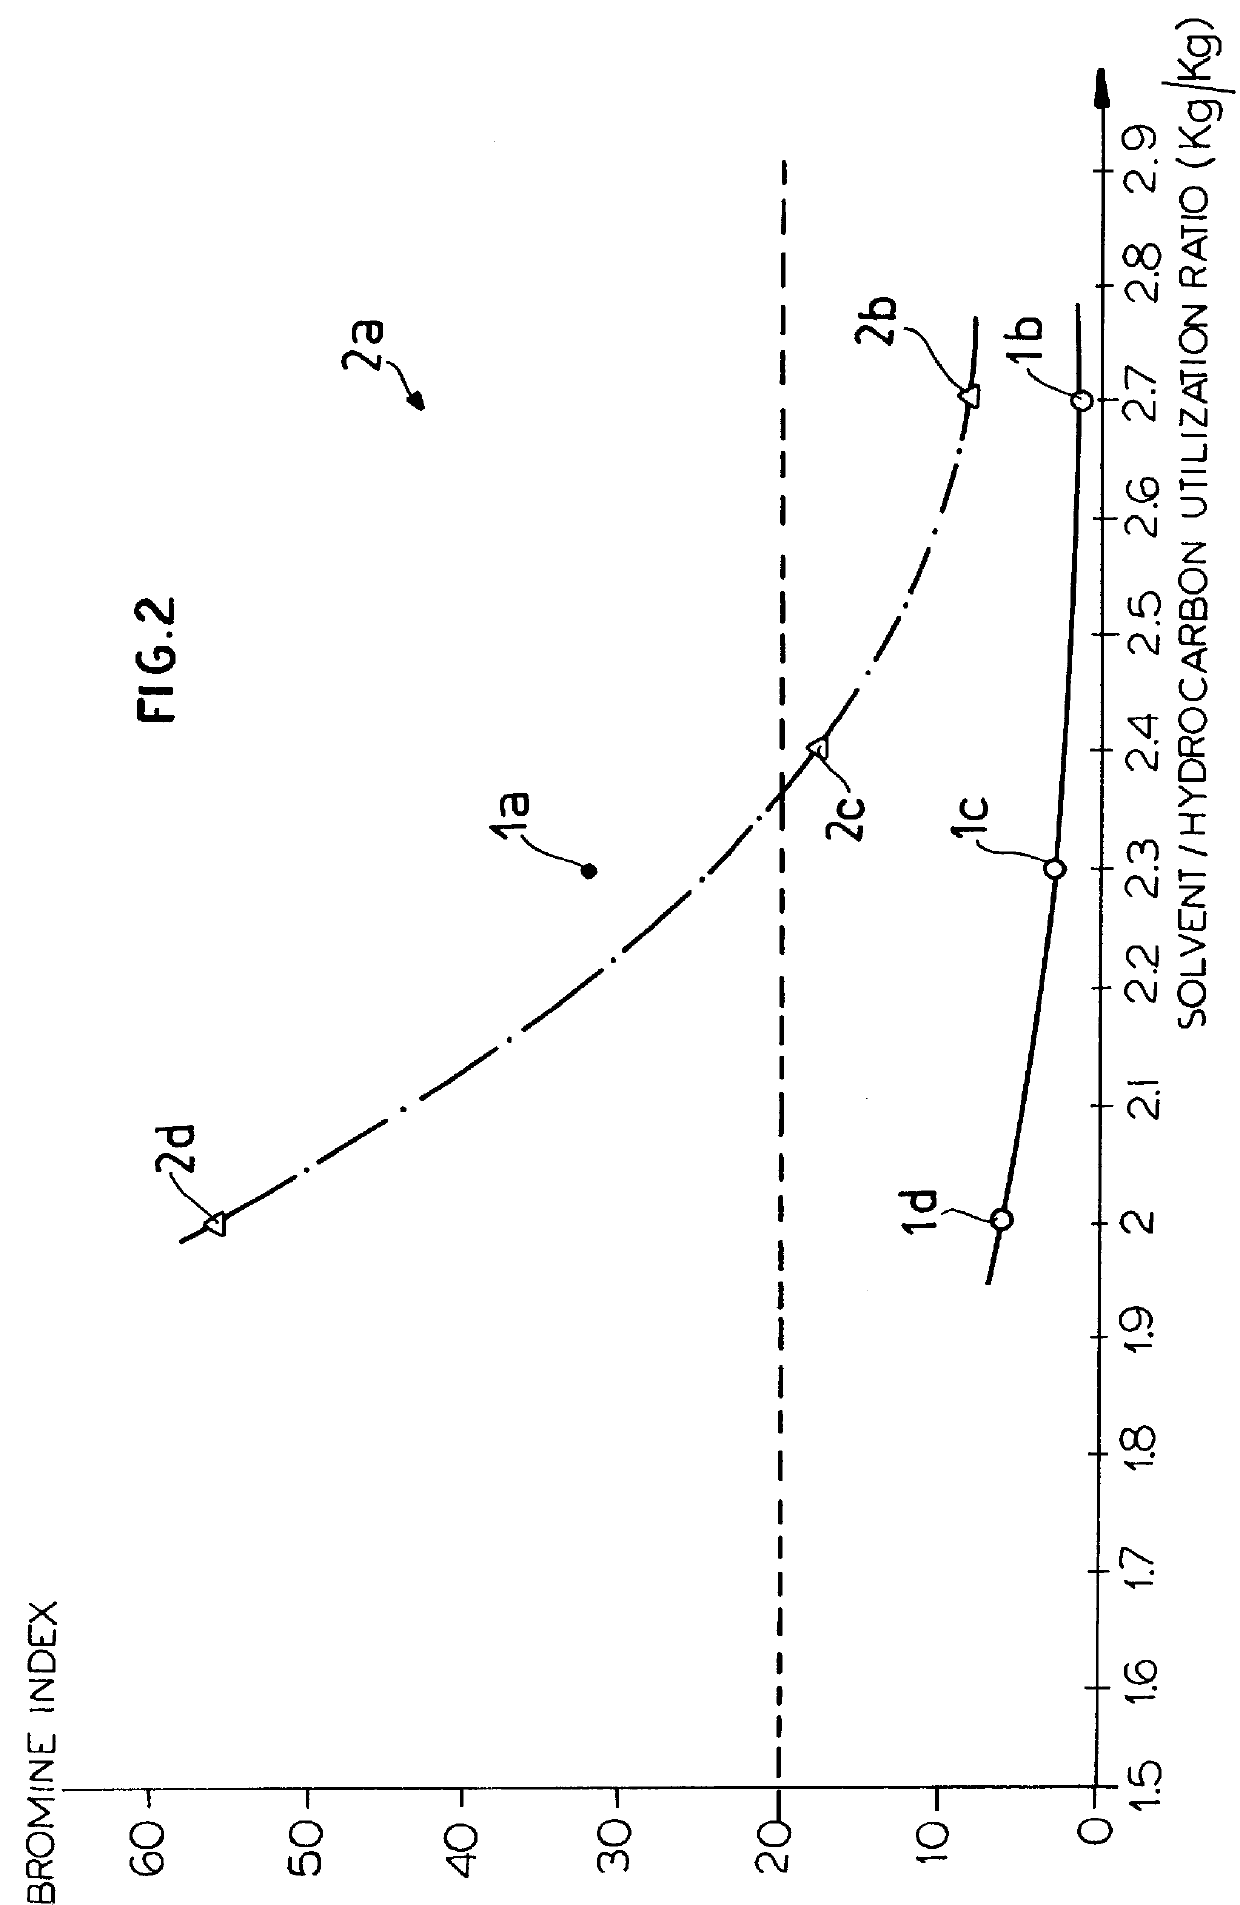 Process for generating pure benzene from reformed gasoline